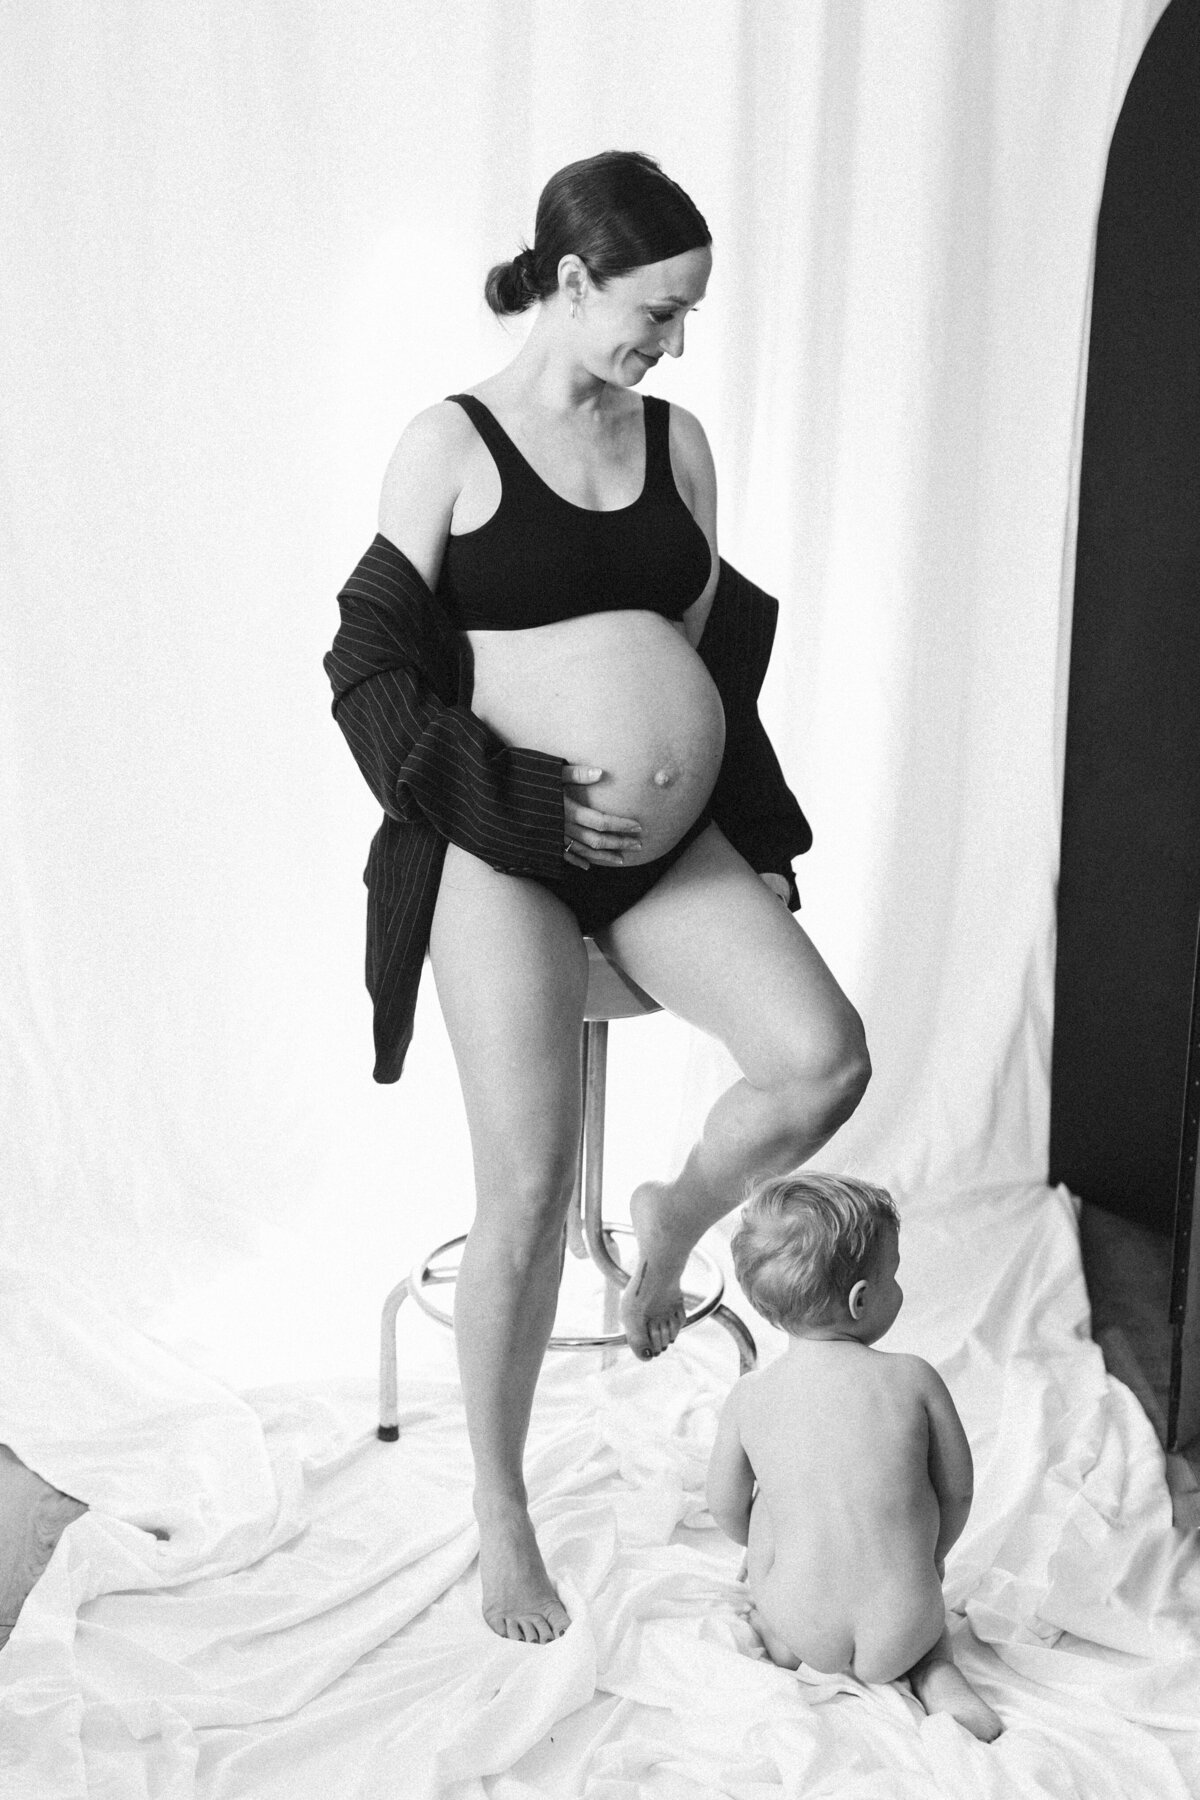 Maternity Sessions that include siblings